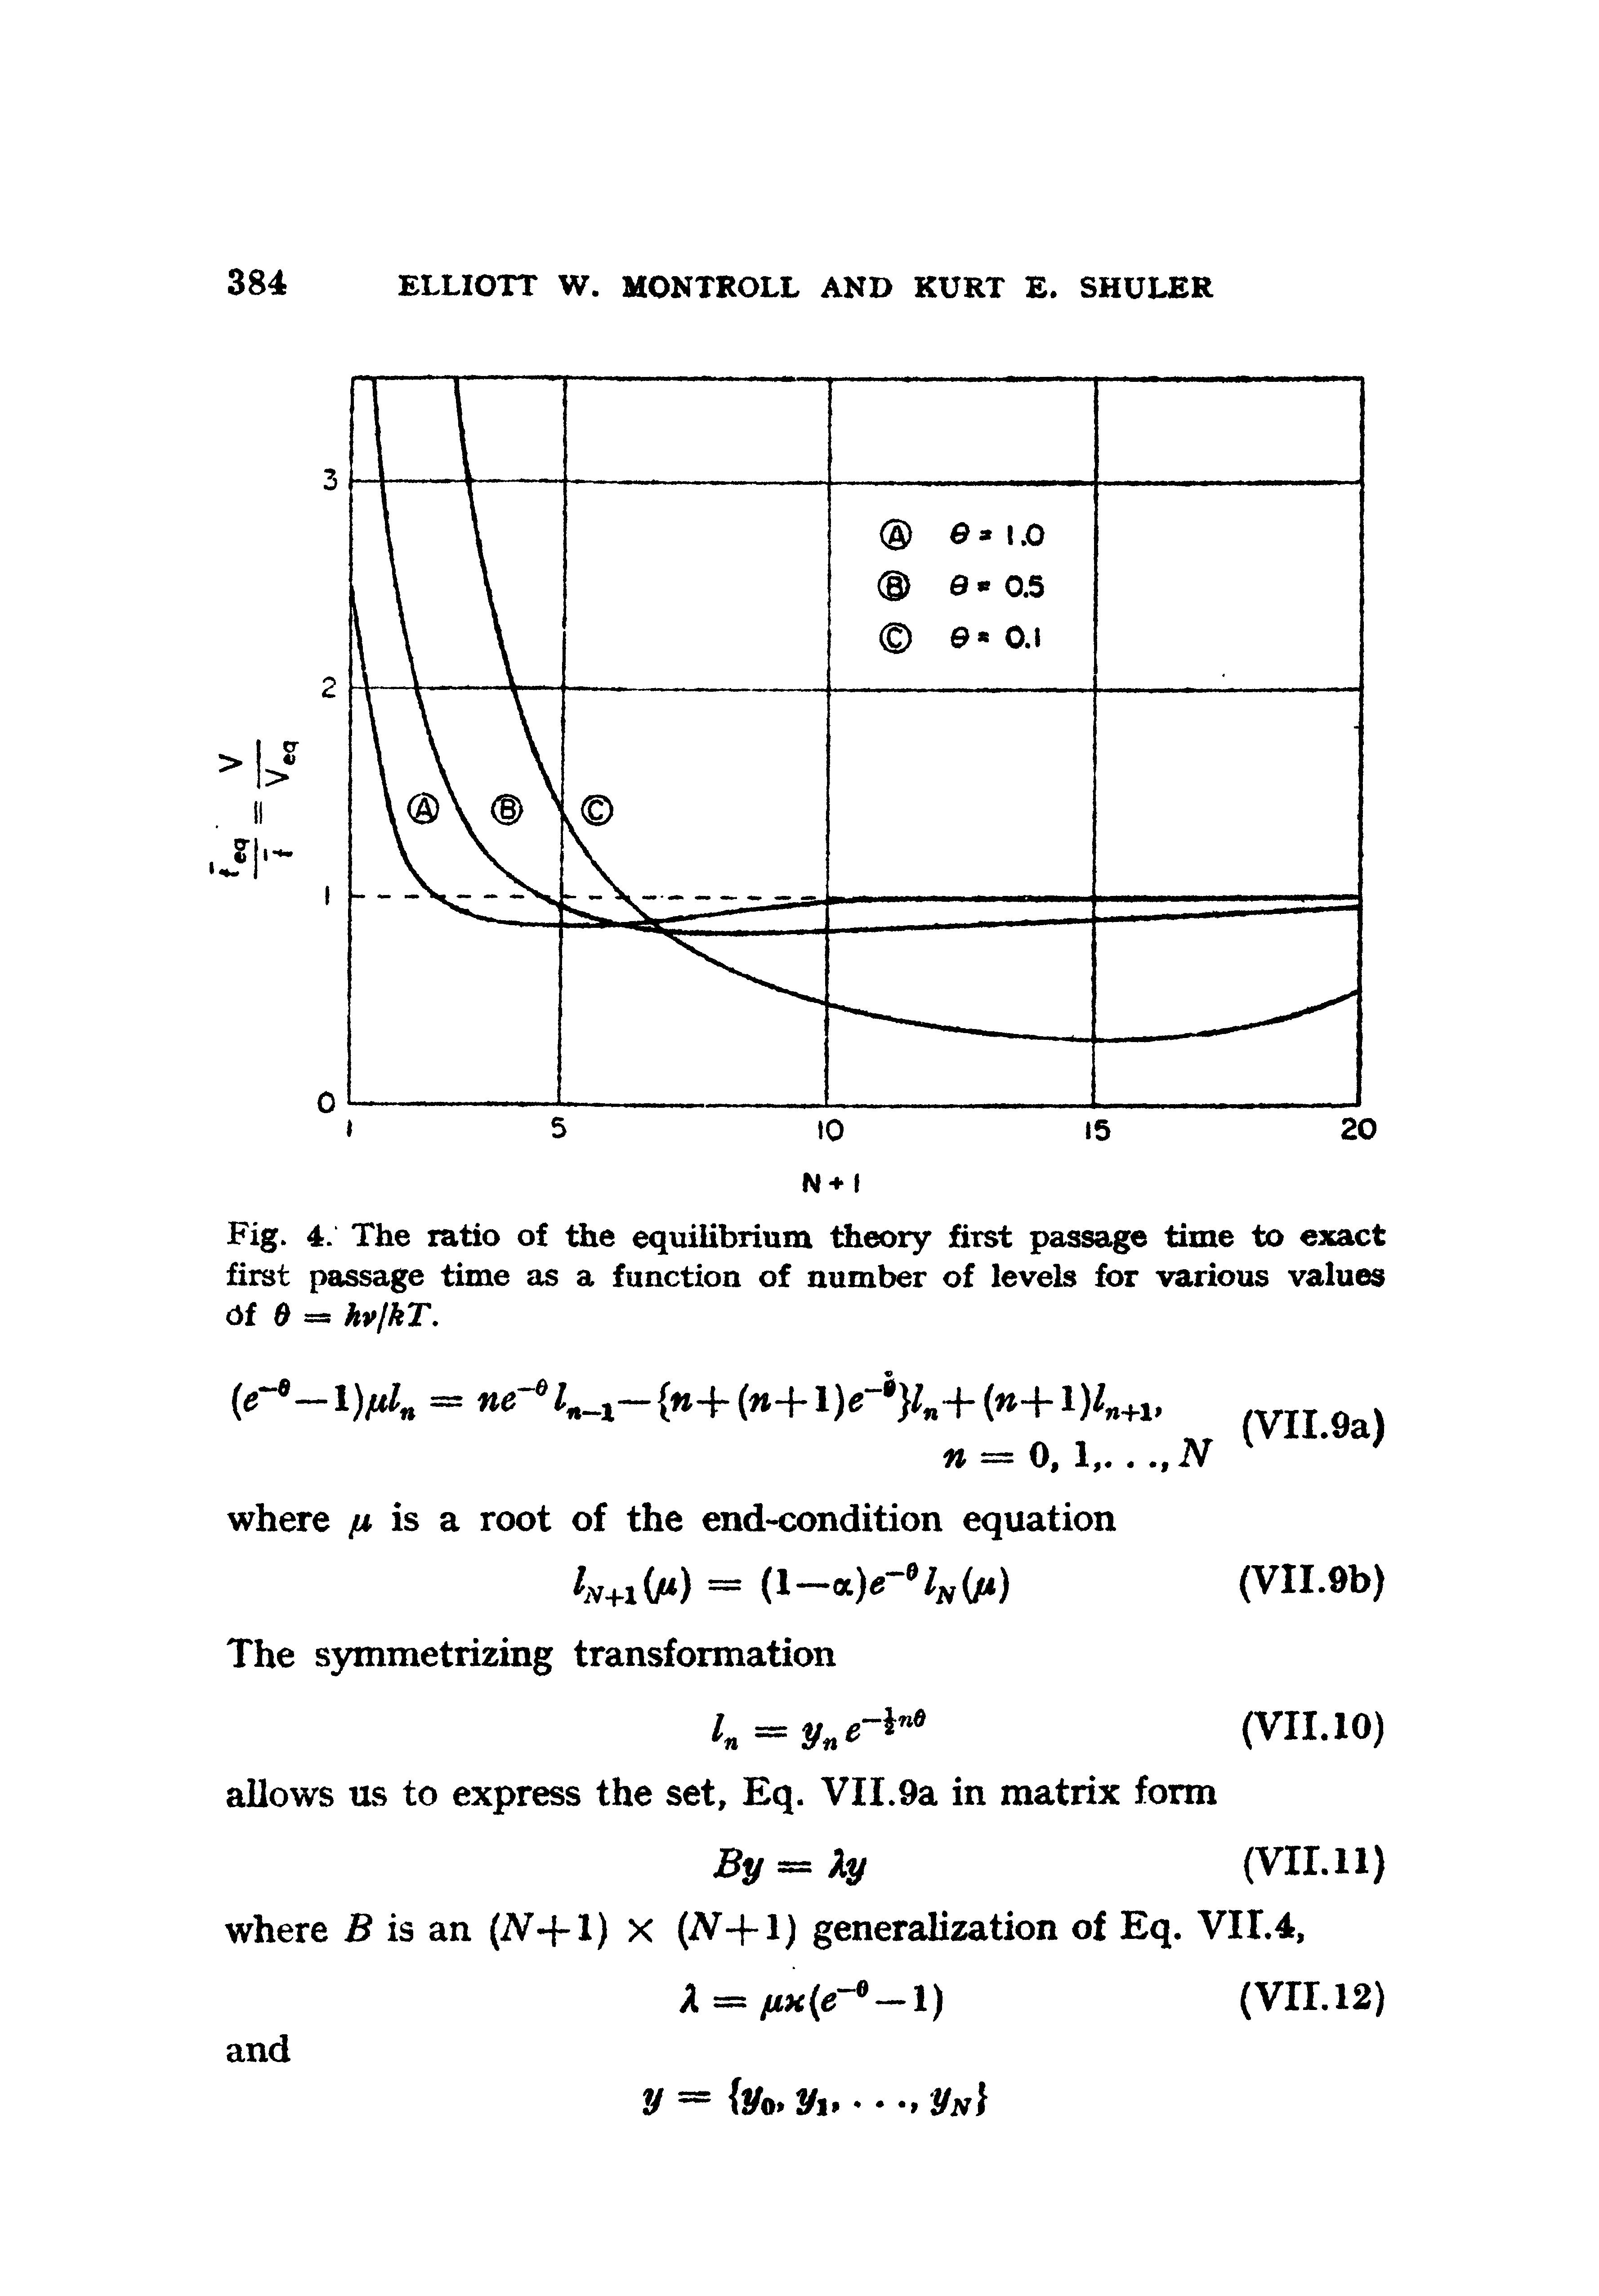 Fig. 4. The ratio of the equilibrium theory first passage time to exact first passage time as a function of number of levels for various values 6t hv/kT.